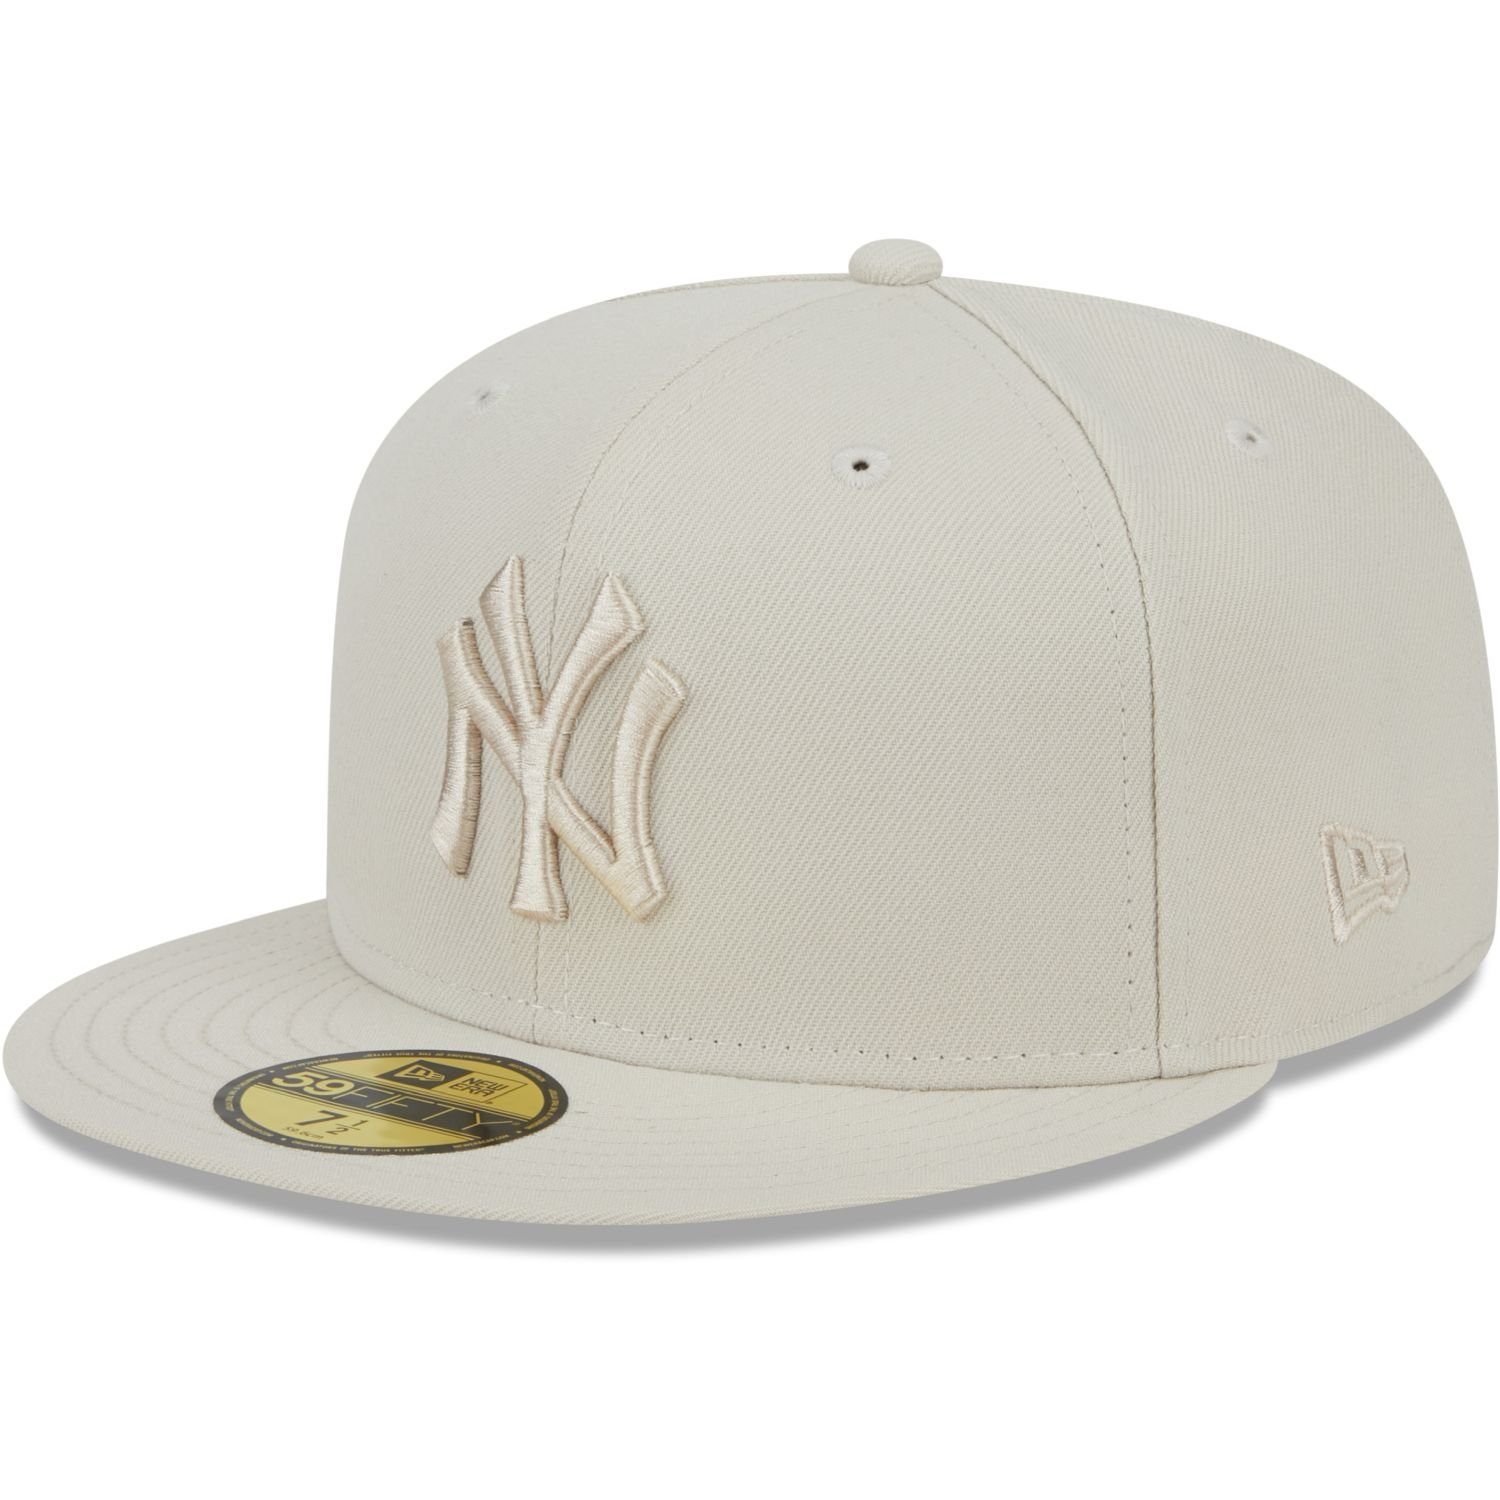 New Era Fitted Cap 59Fifty MLB New York Yankees